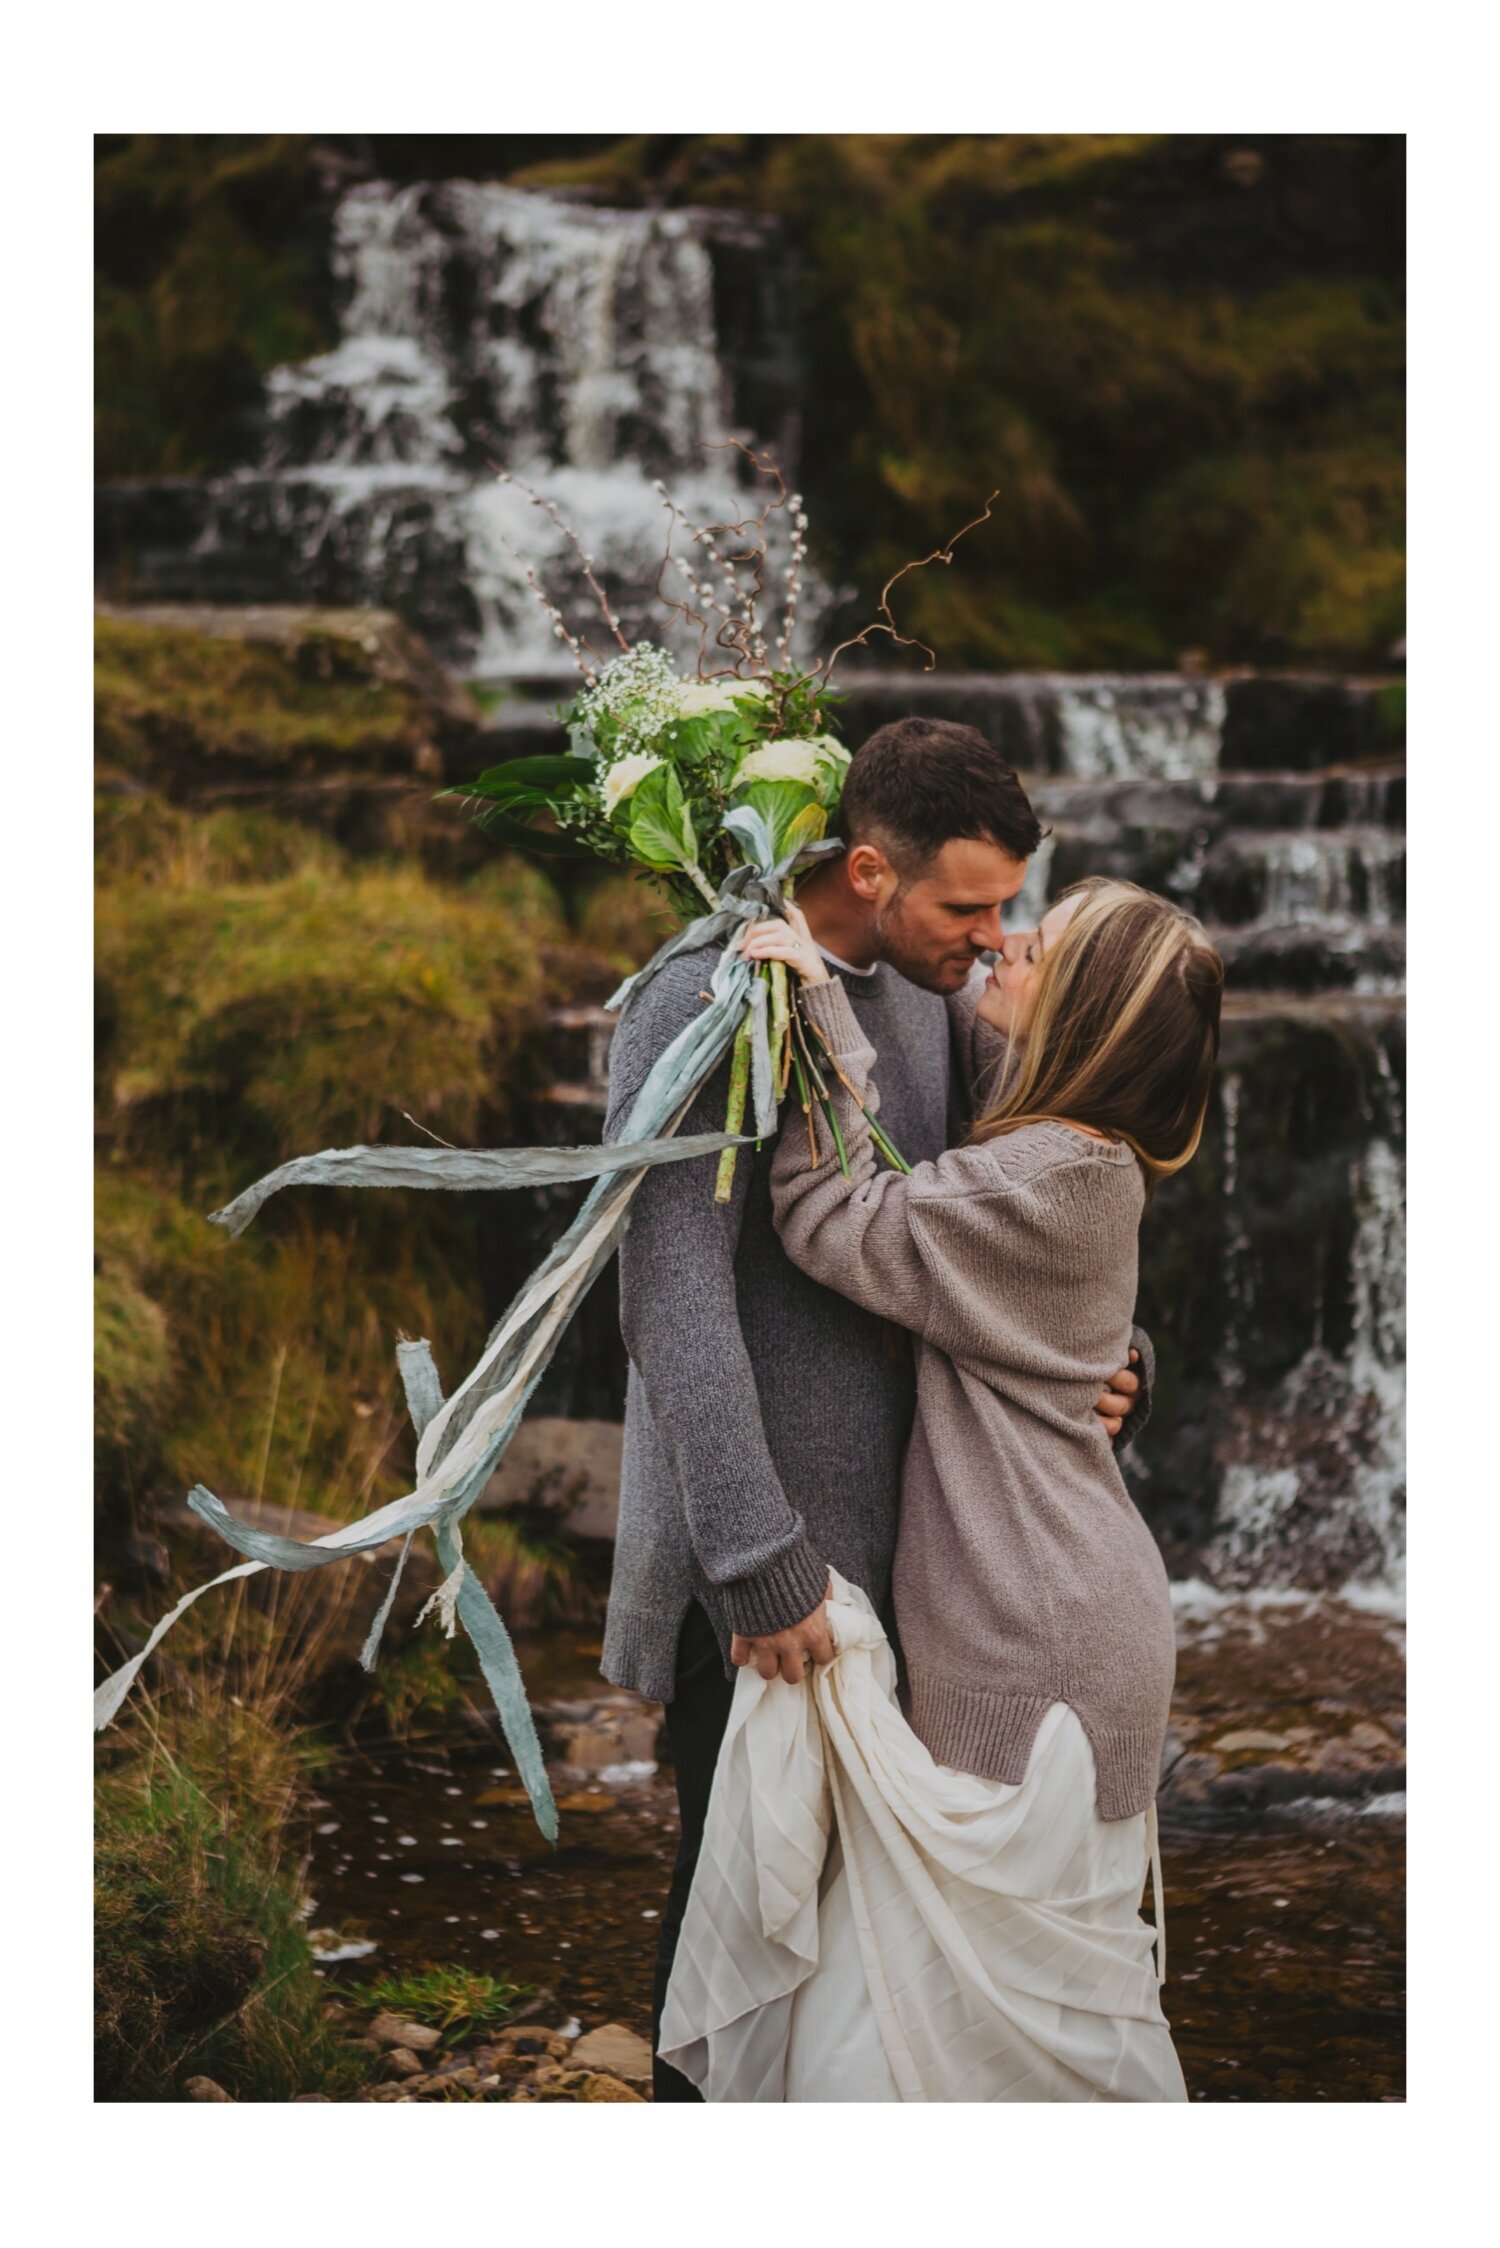 05_TWS-100__grey_dramatic_landscape_alternative_elope_alt_rock_blue_waterfall_winter_flowers_offbeat_dales_waterfalls_autumn_elopement_photography_ribbons_moody_bride_silver_wedding_yorkshire_rainy_cloudy_cosy_weather_photographer_florals_groom.jpg